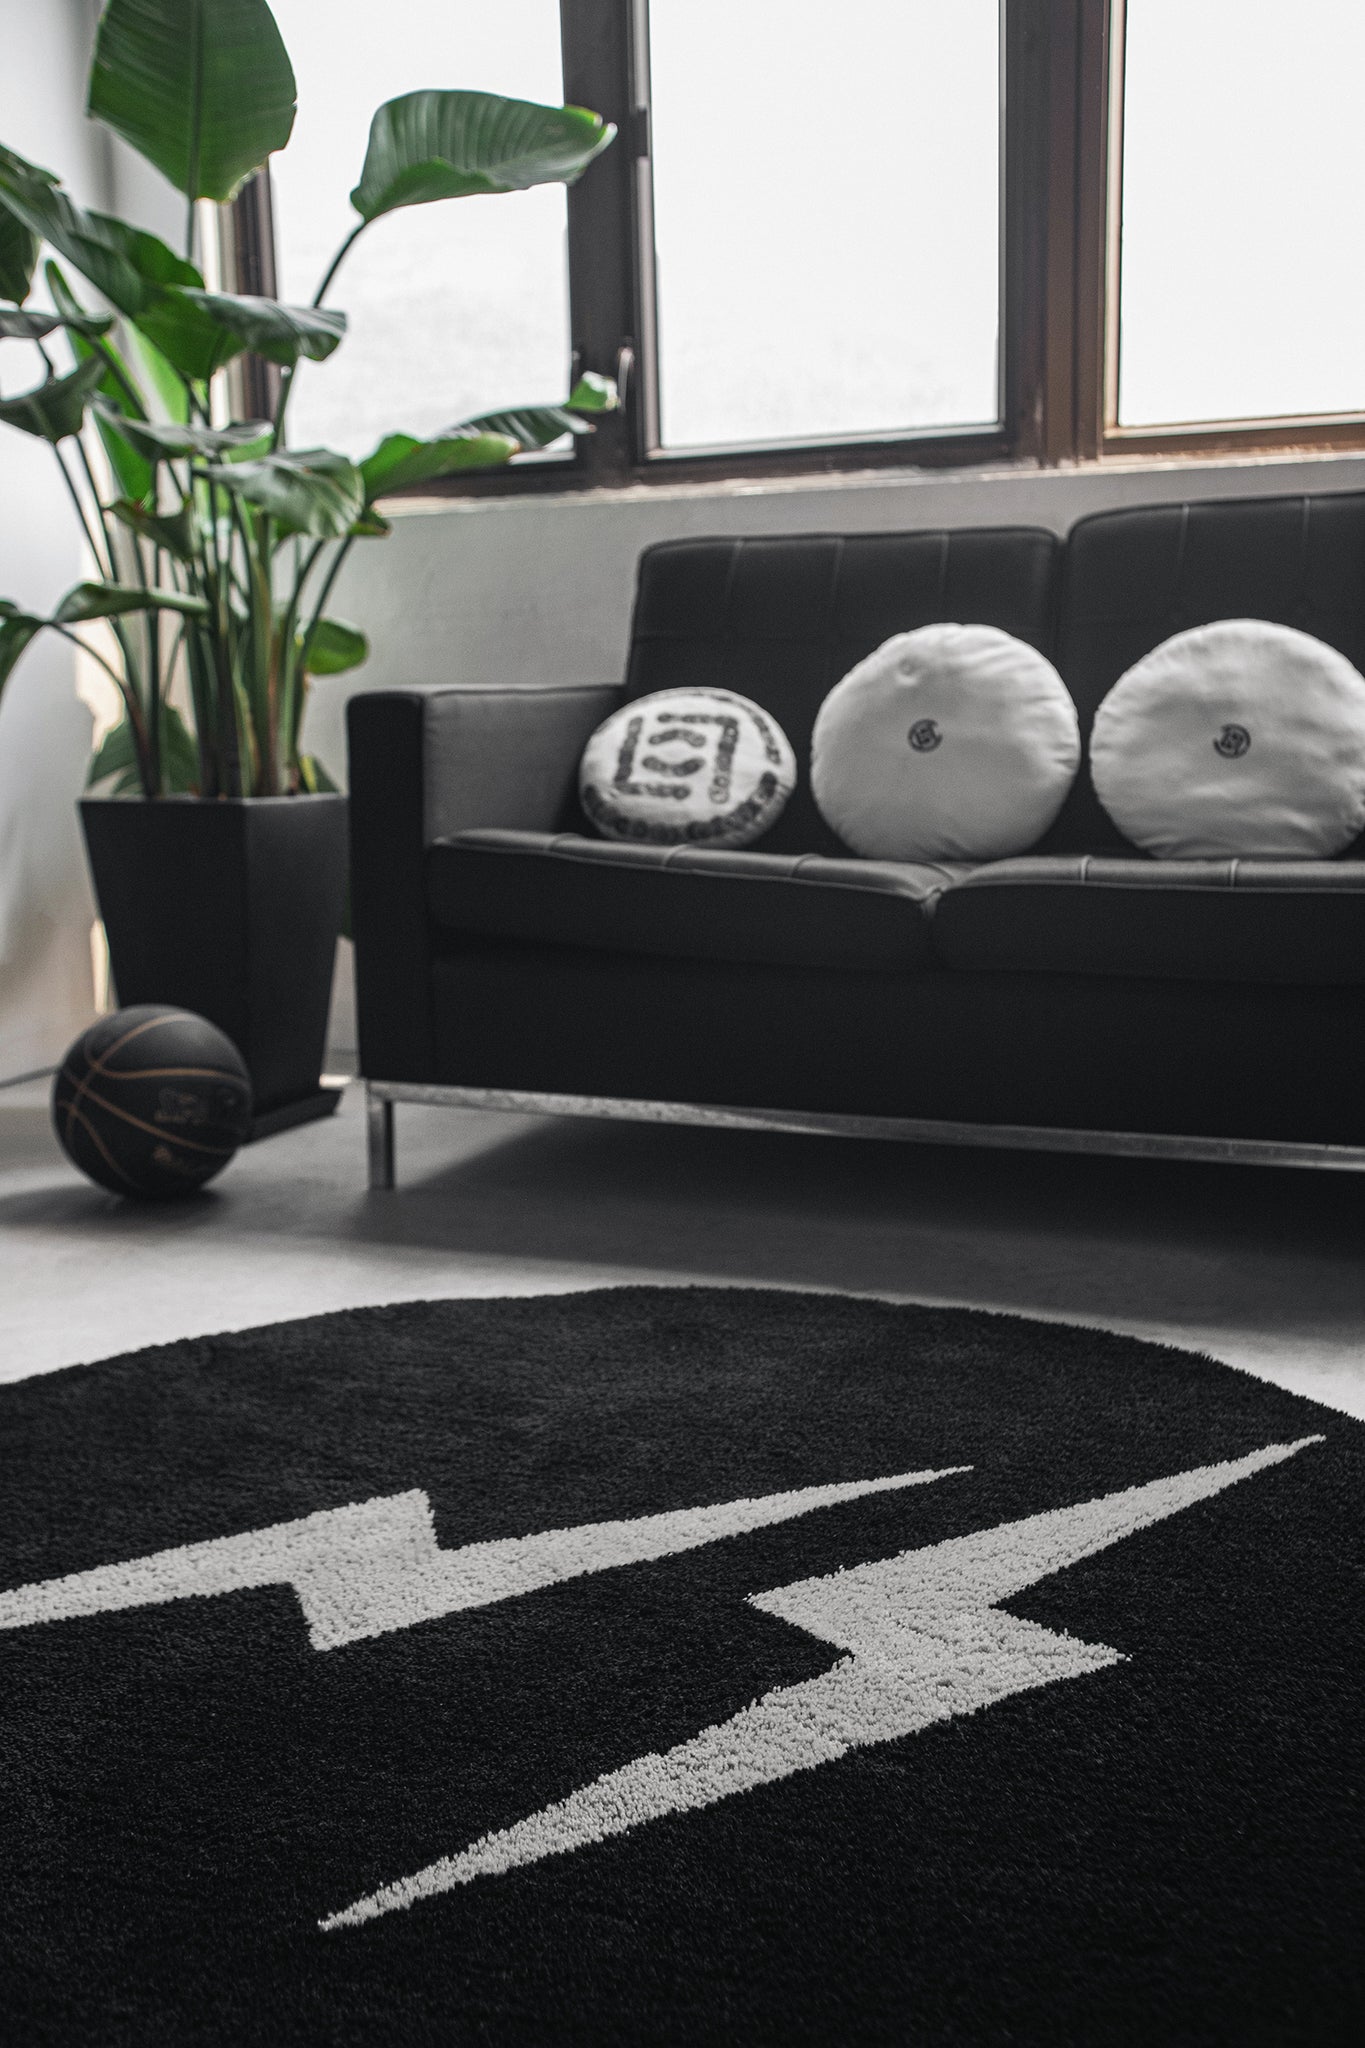 G1950 And fragment design Collaborate Once Again On Logo Rugs in